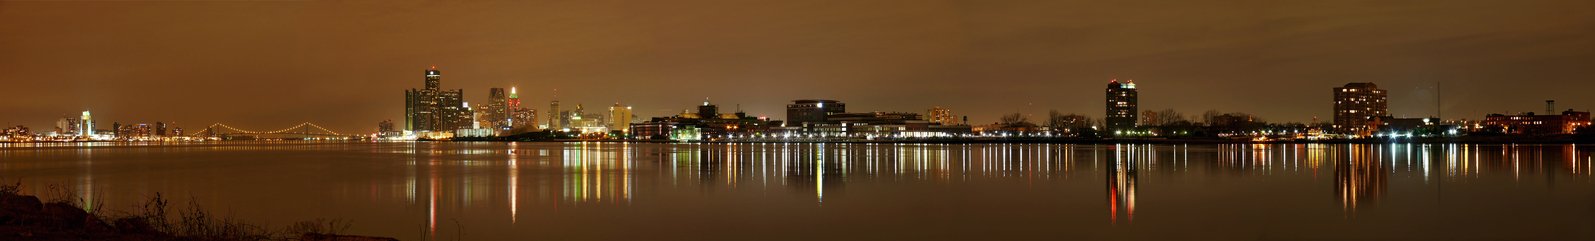 a night time view of some lights on the water